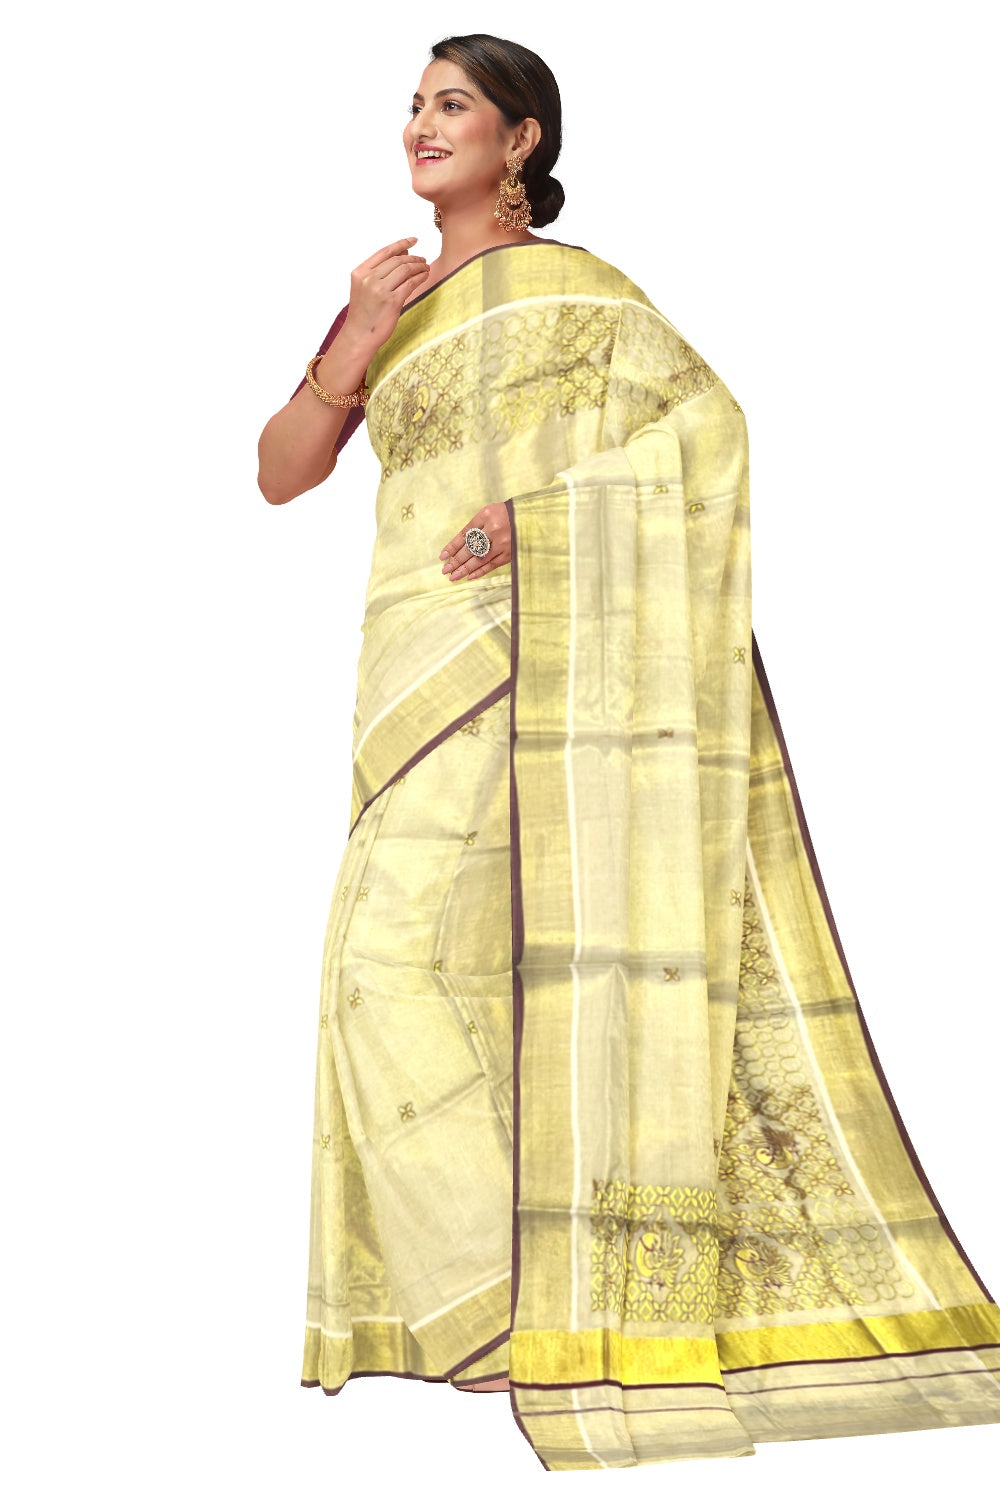 Kerala Tissue Kasavu Heavy Work Saree with Golden and Maroon Peacock Embroidery Design